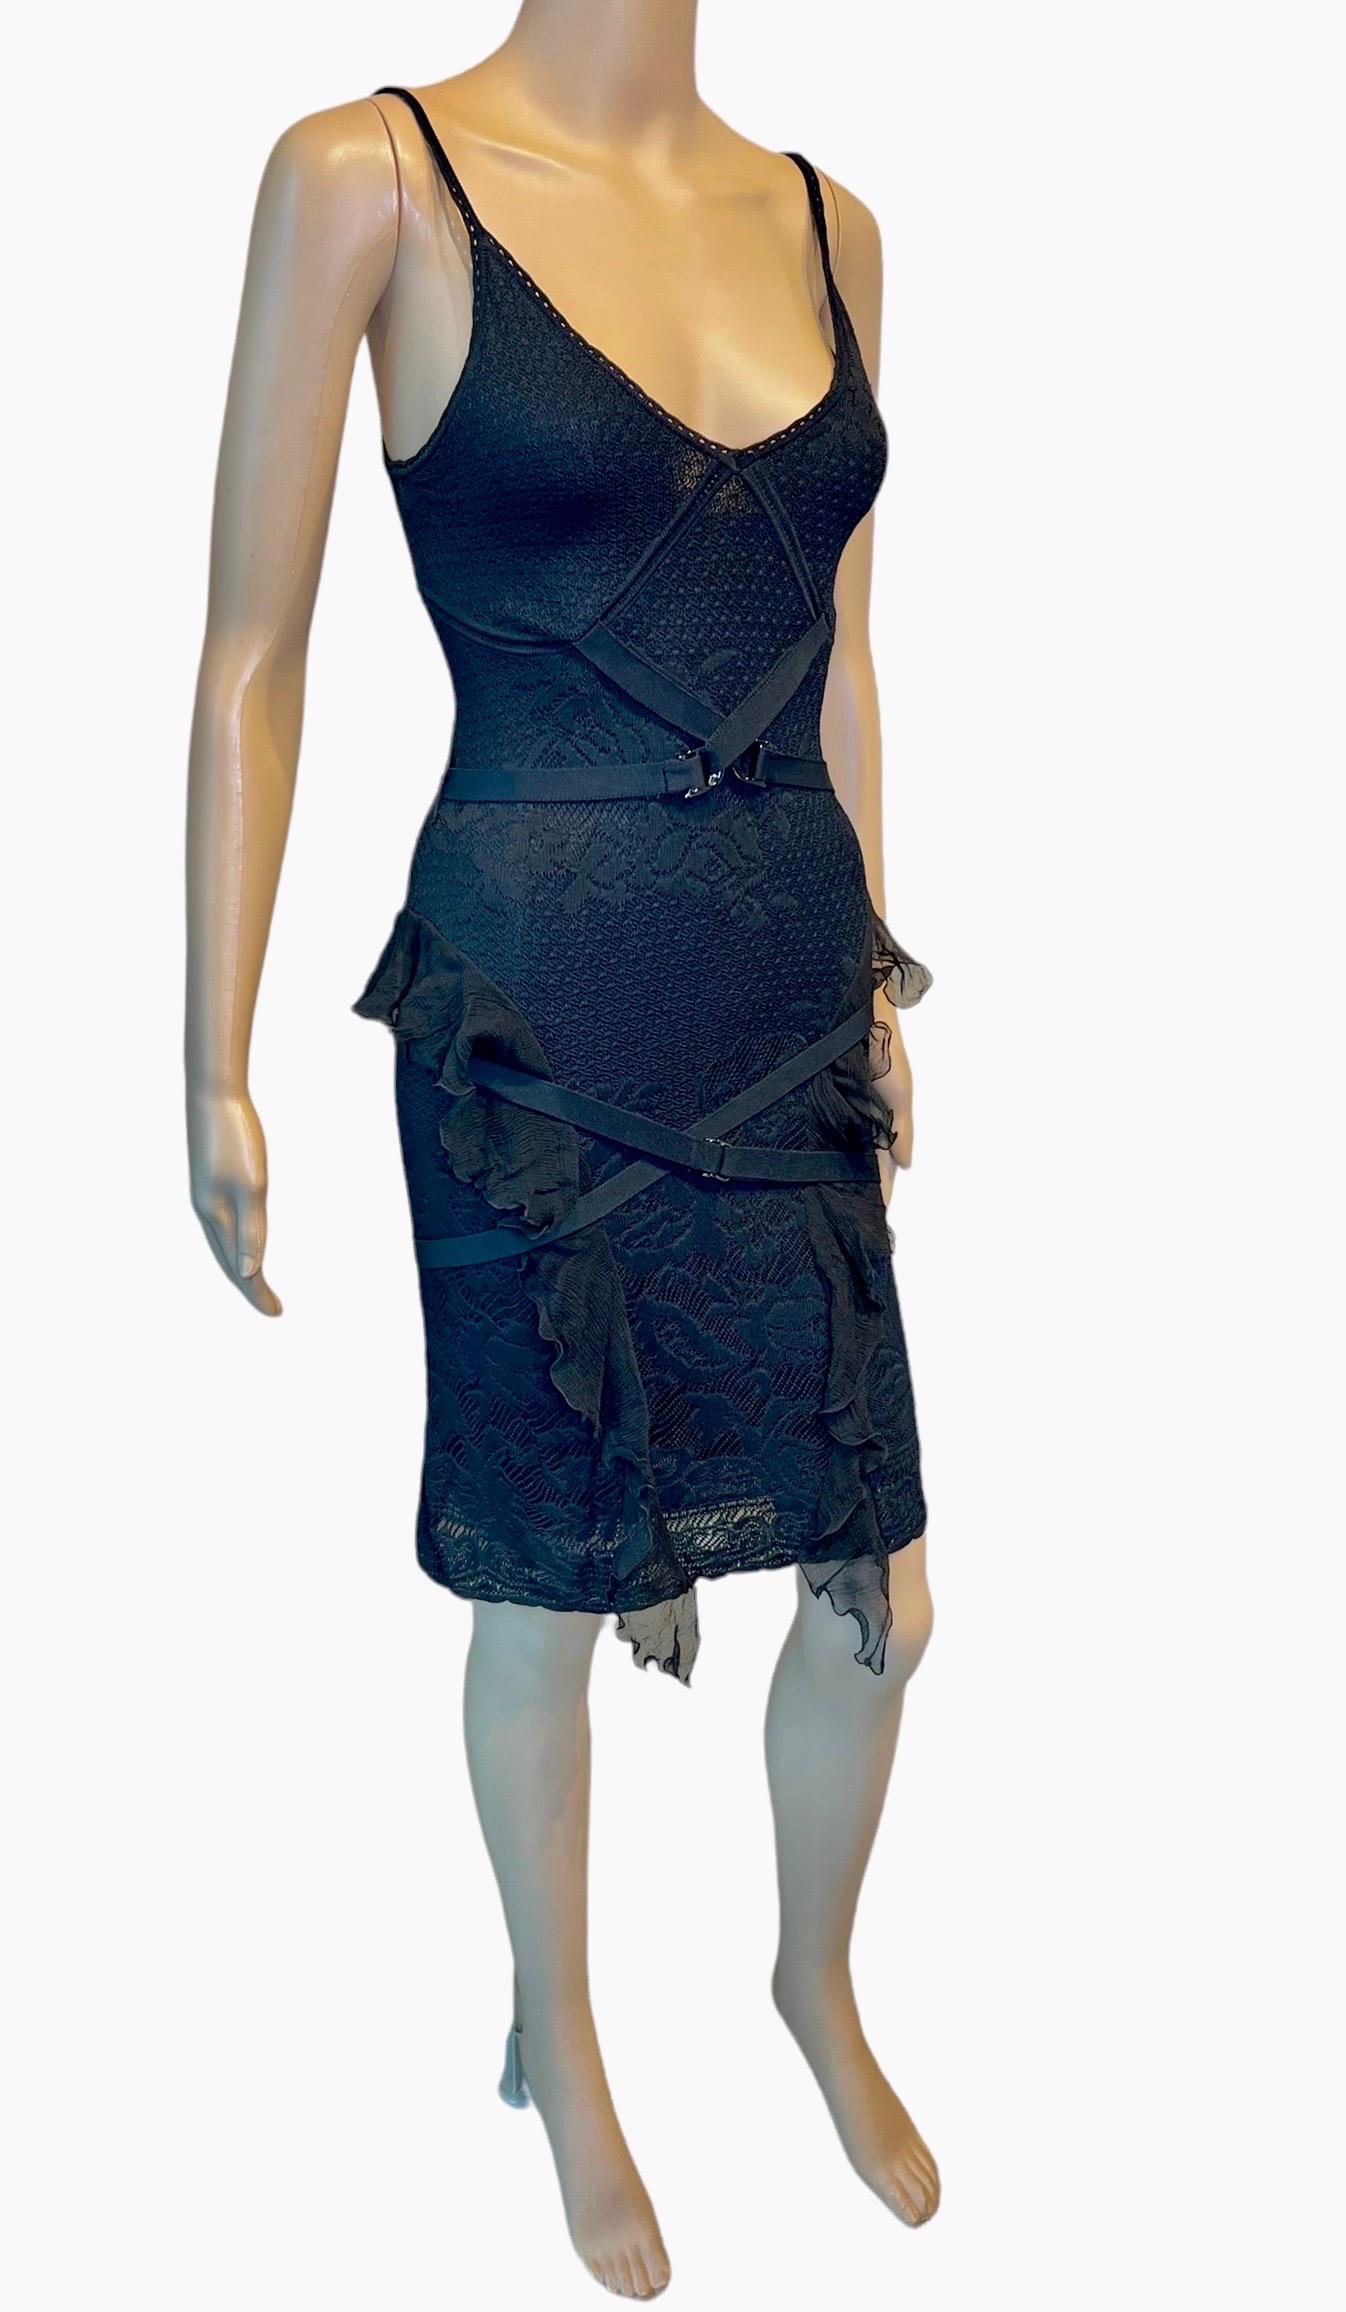 Christian Dior by John Galliano S/S 2003 Sheer Lace Bondage Knit Black Dress  For Sale 6